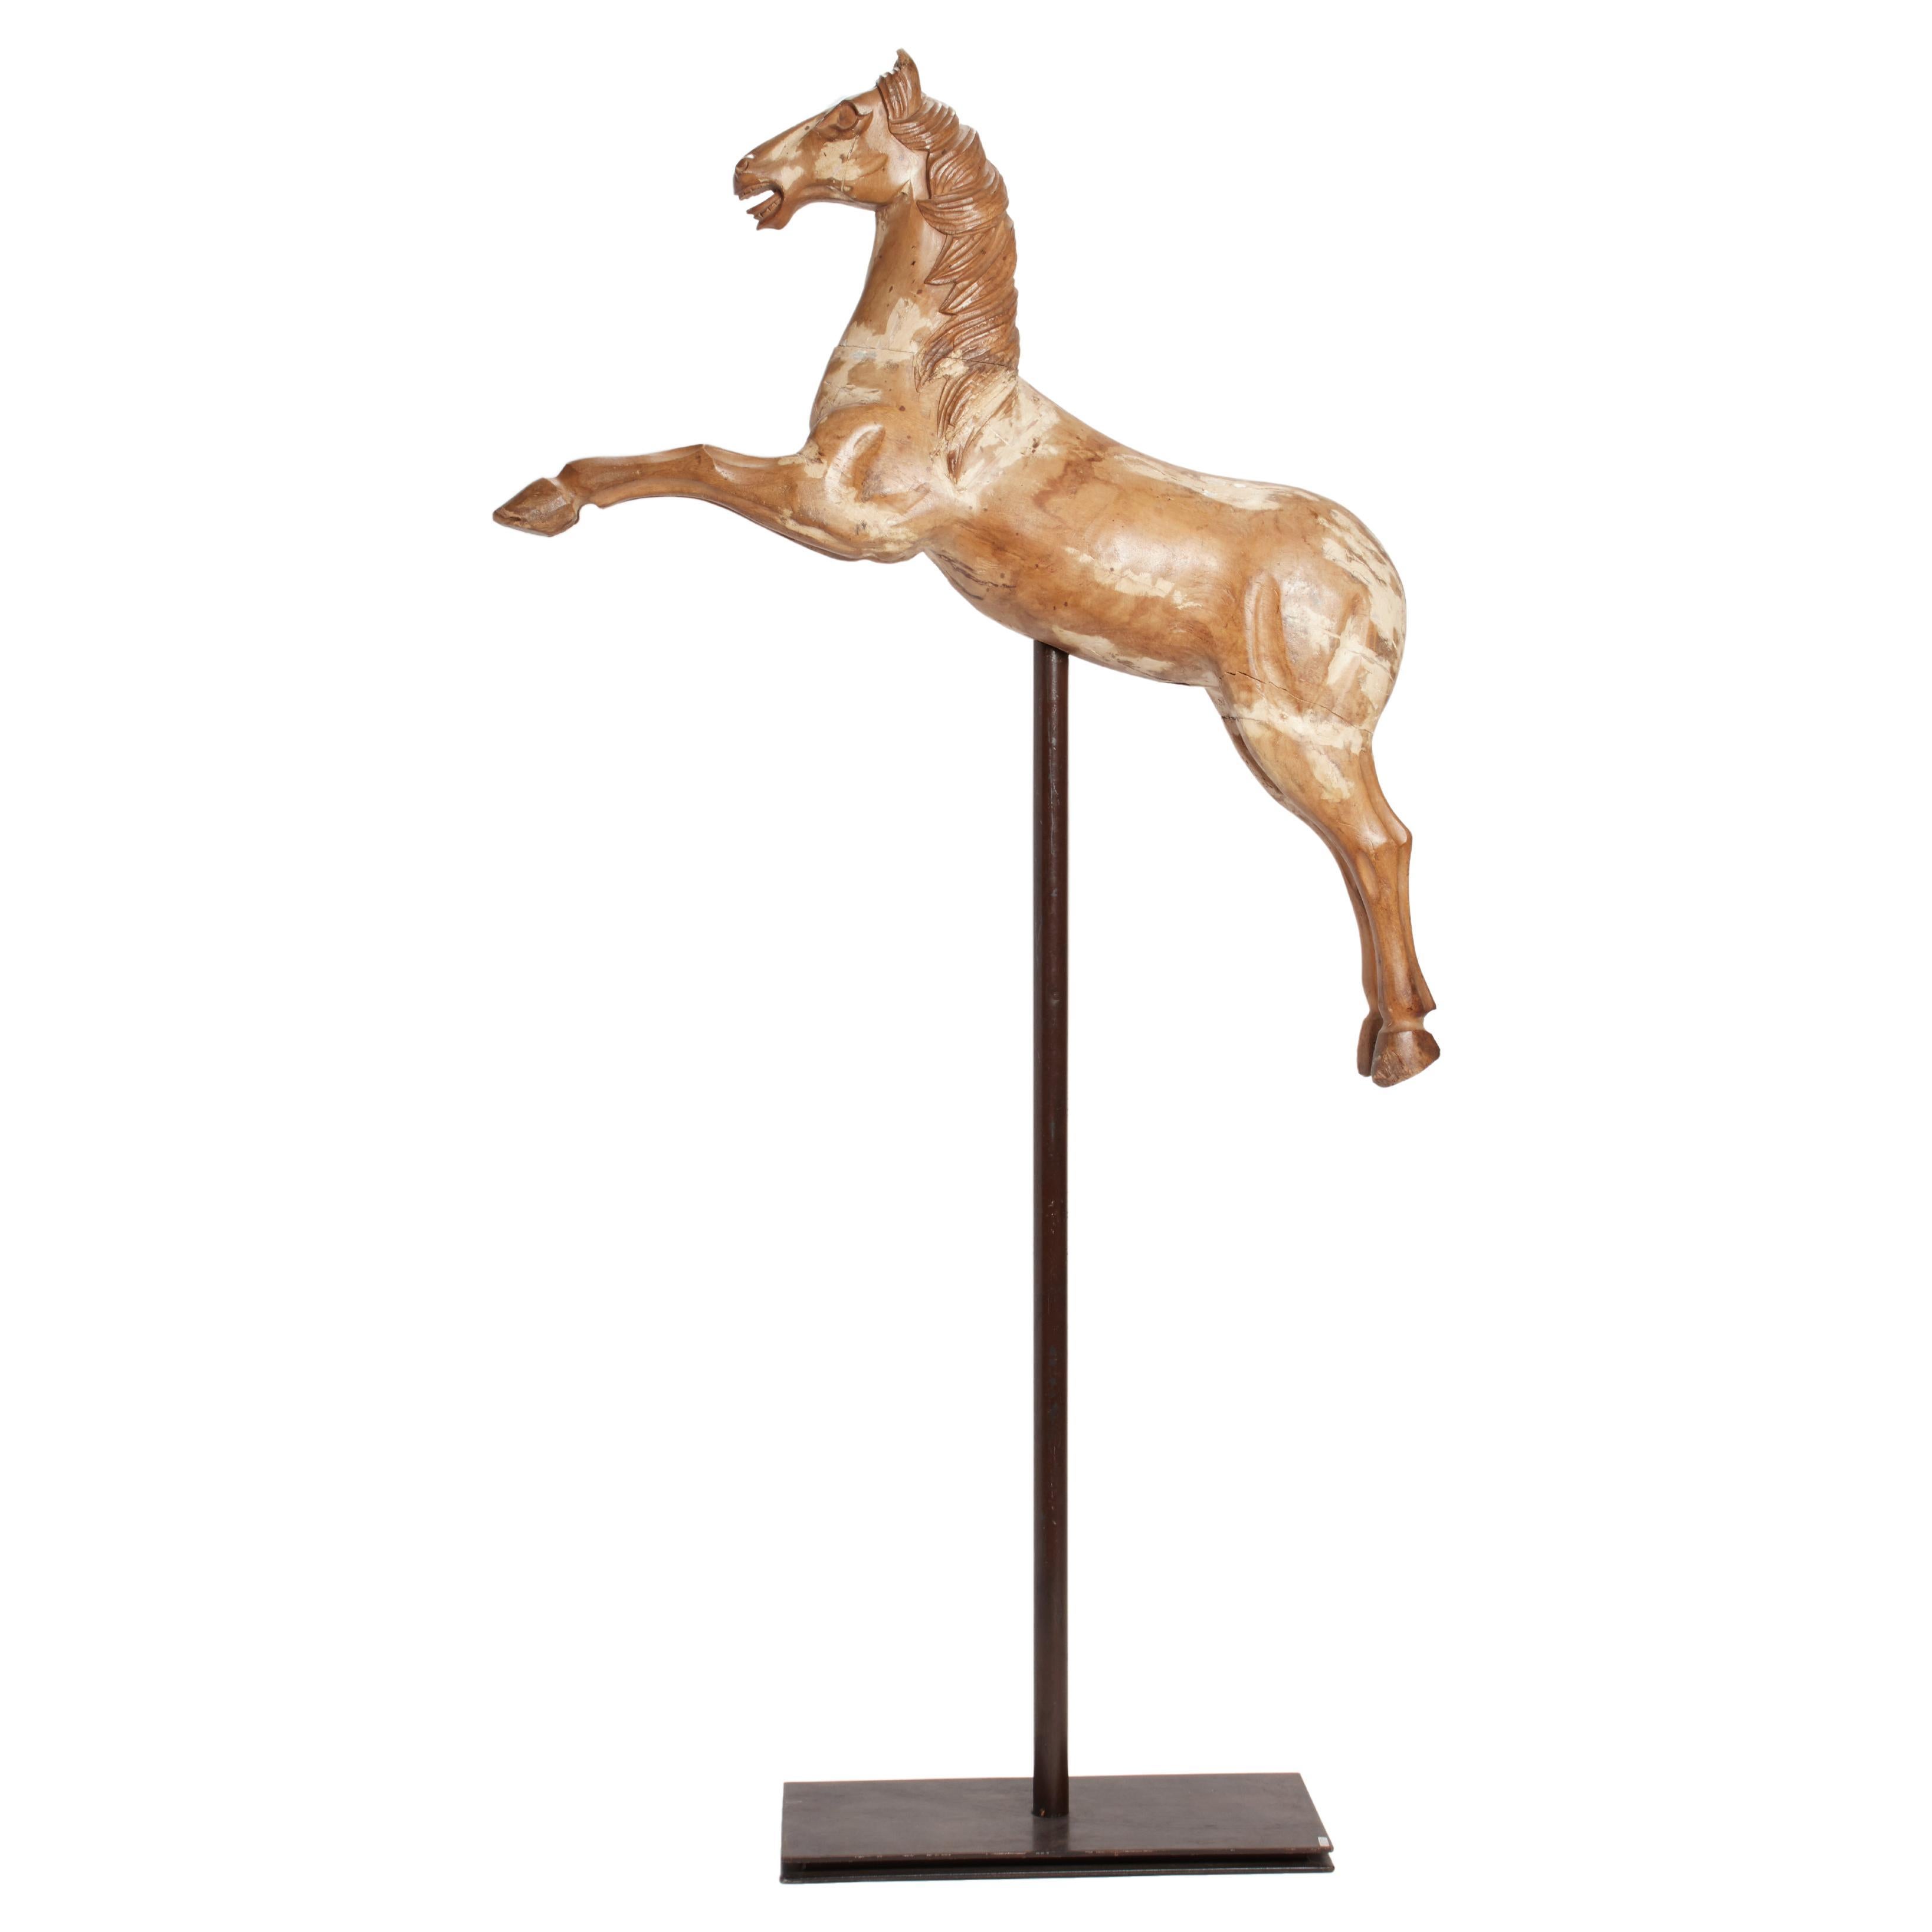 Sculpture of a Carrousel Horse, Italy, 1750